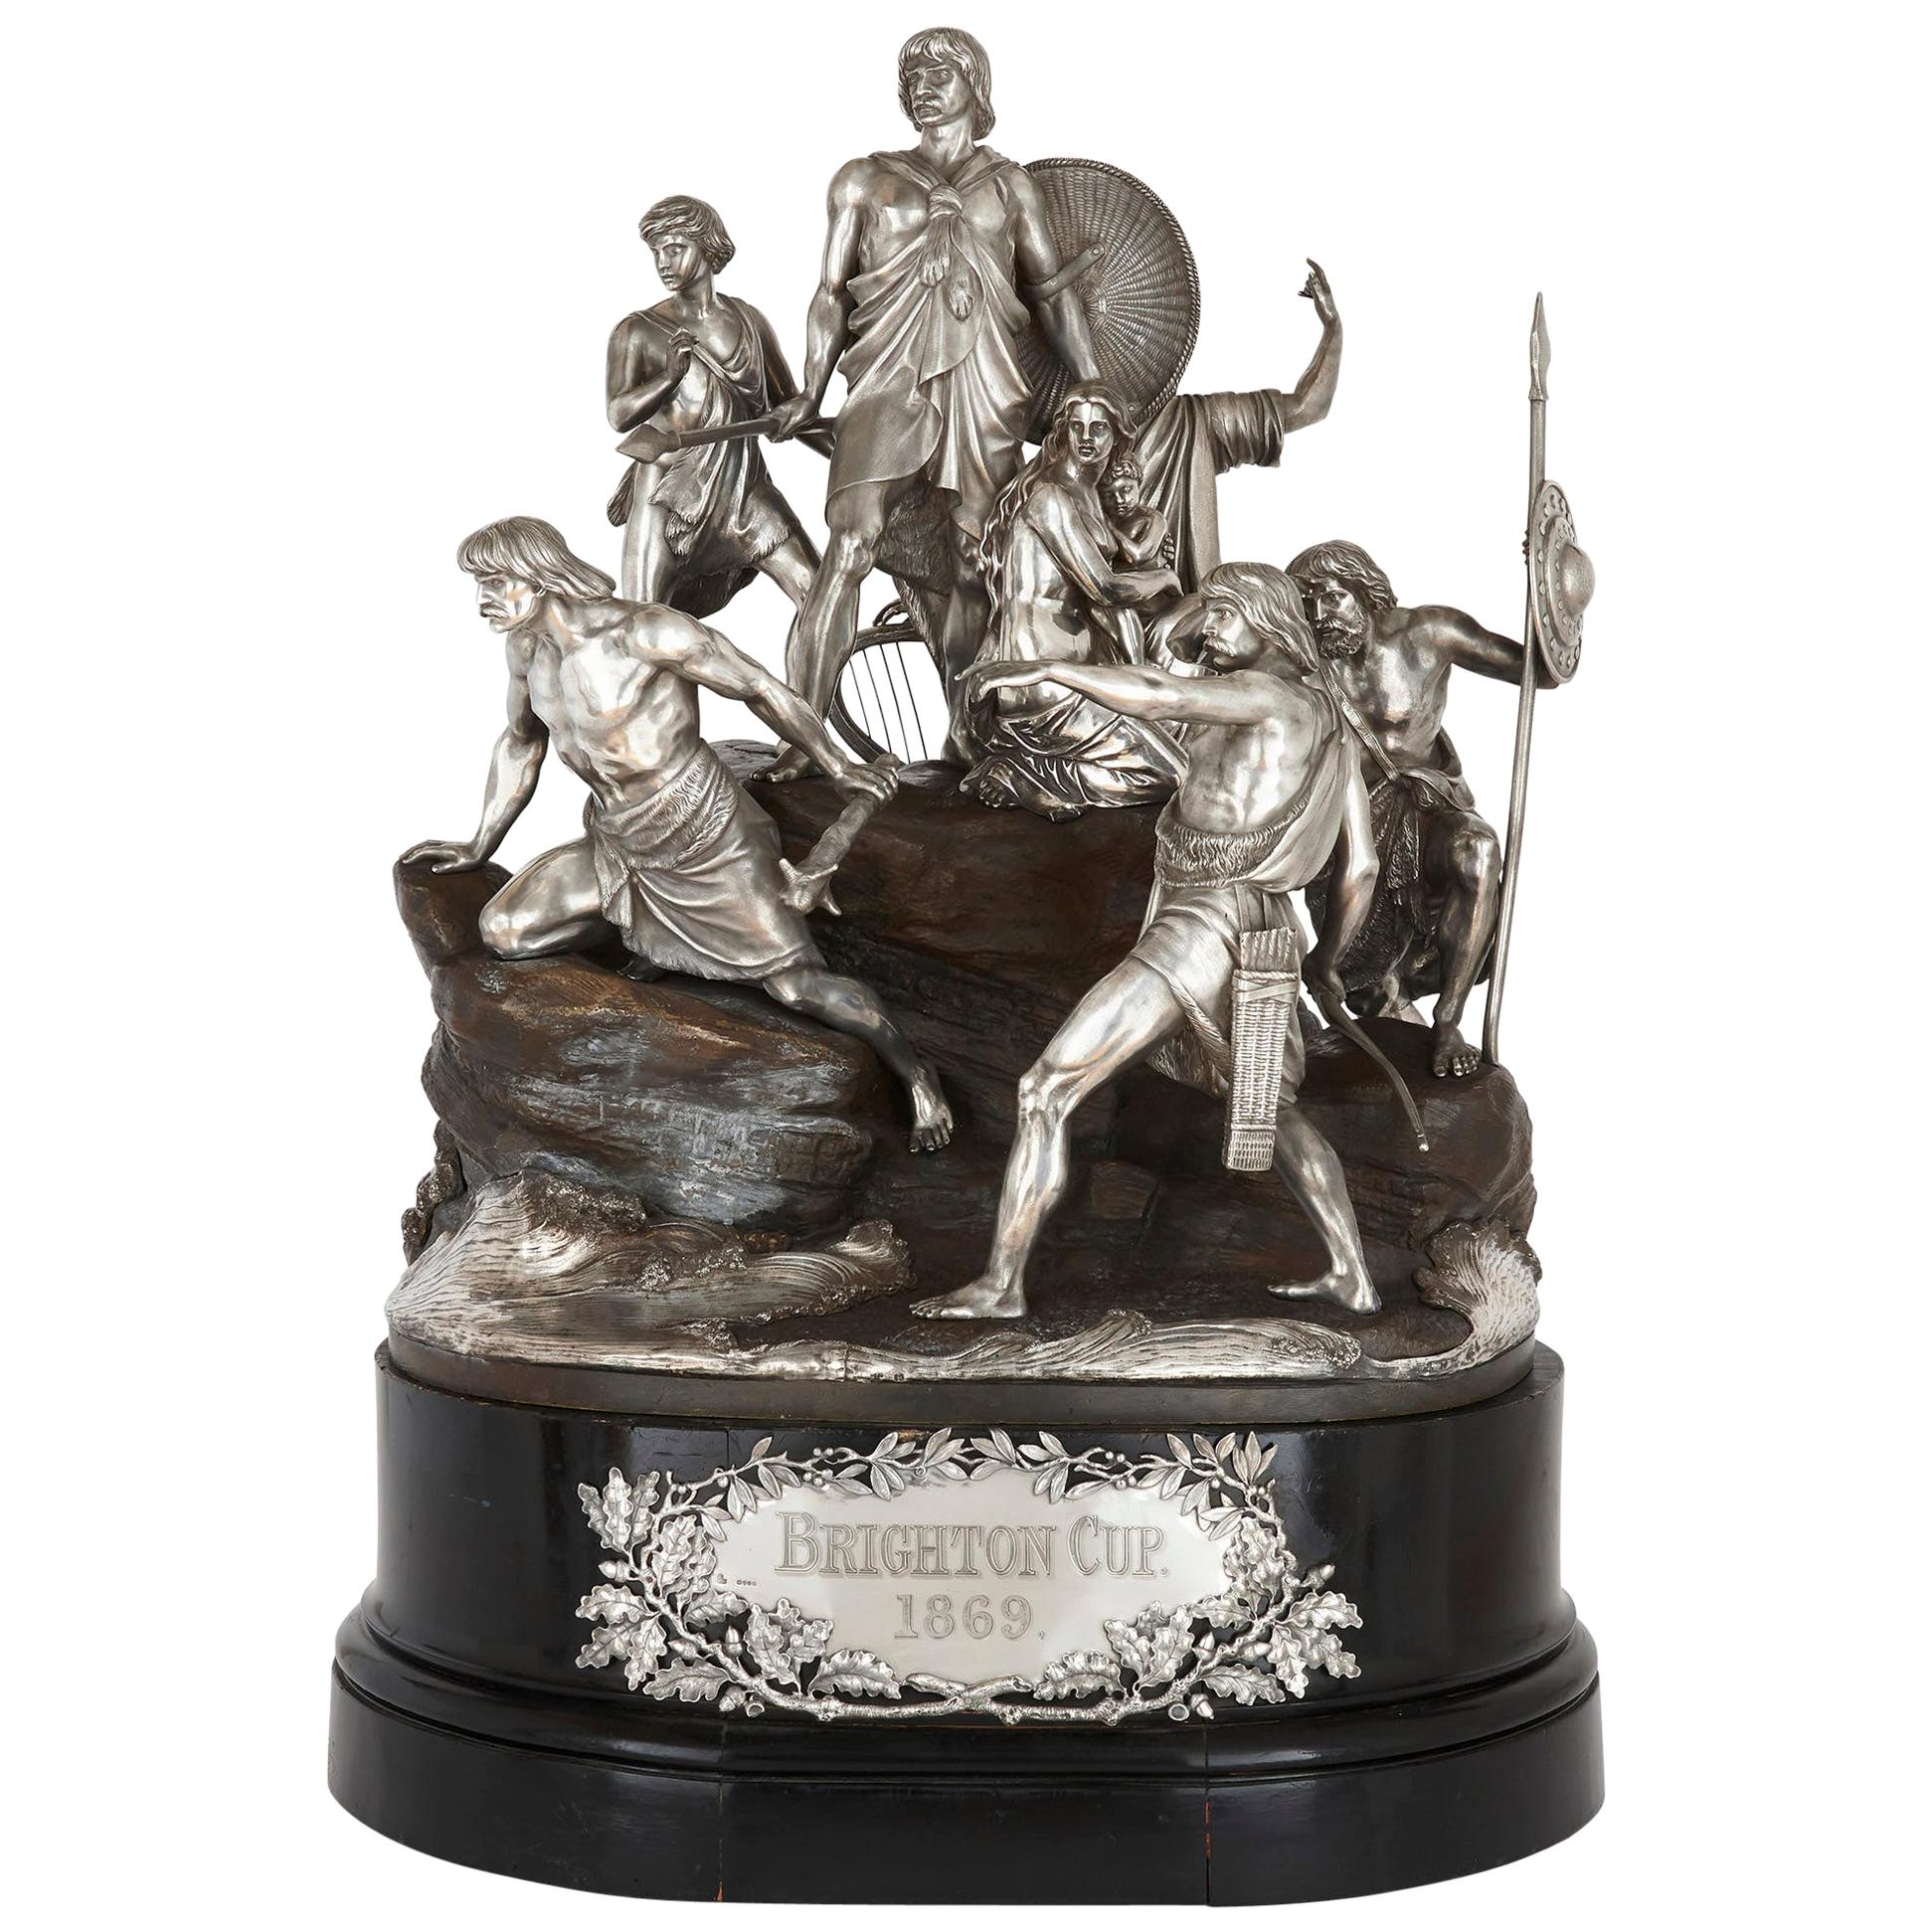 Brighton Cup, Very Large Silver and Bronze Horse Racing Trophy by Monti